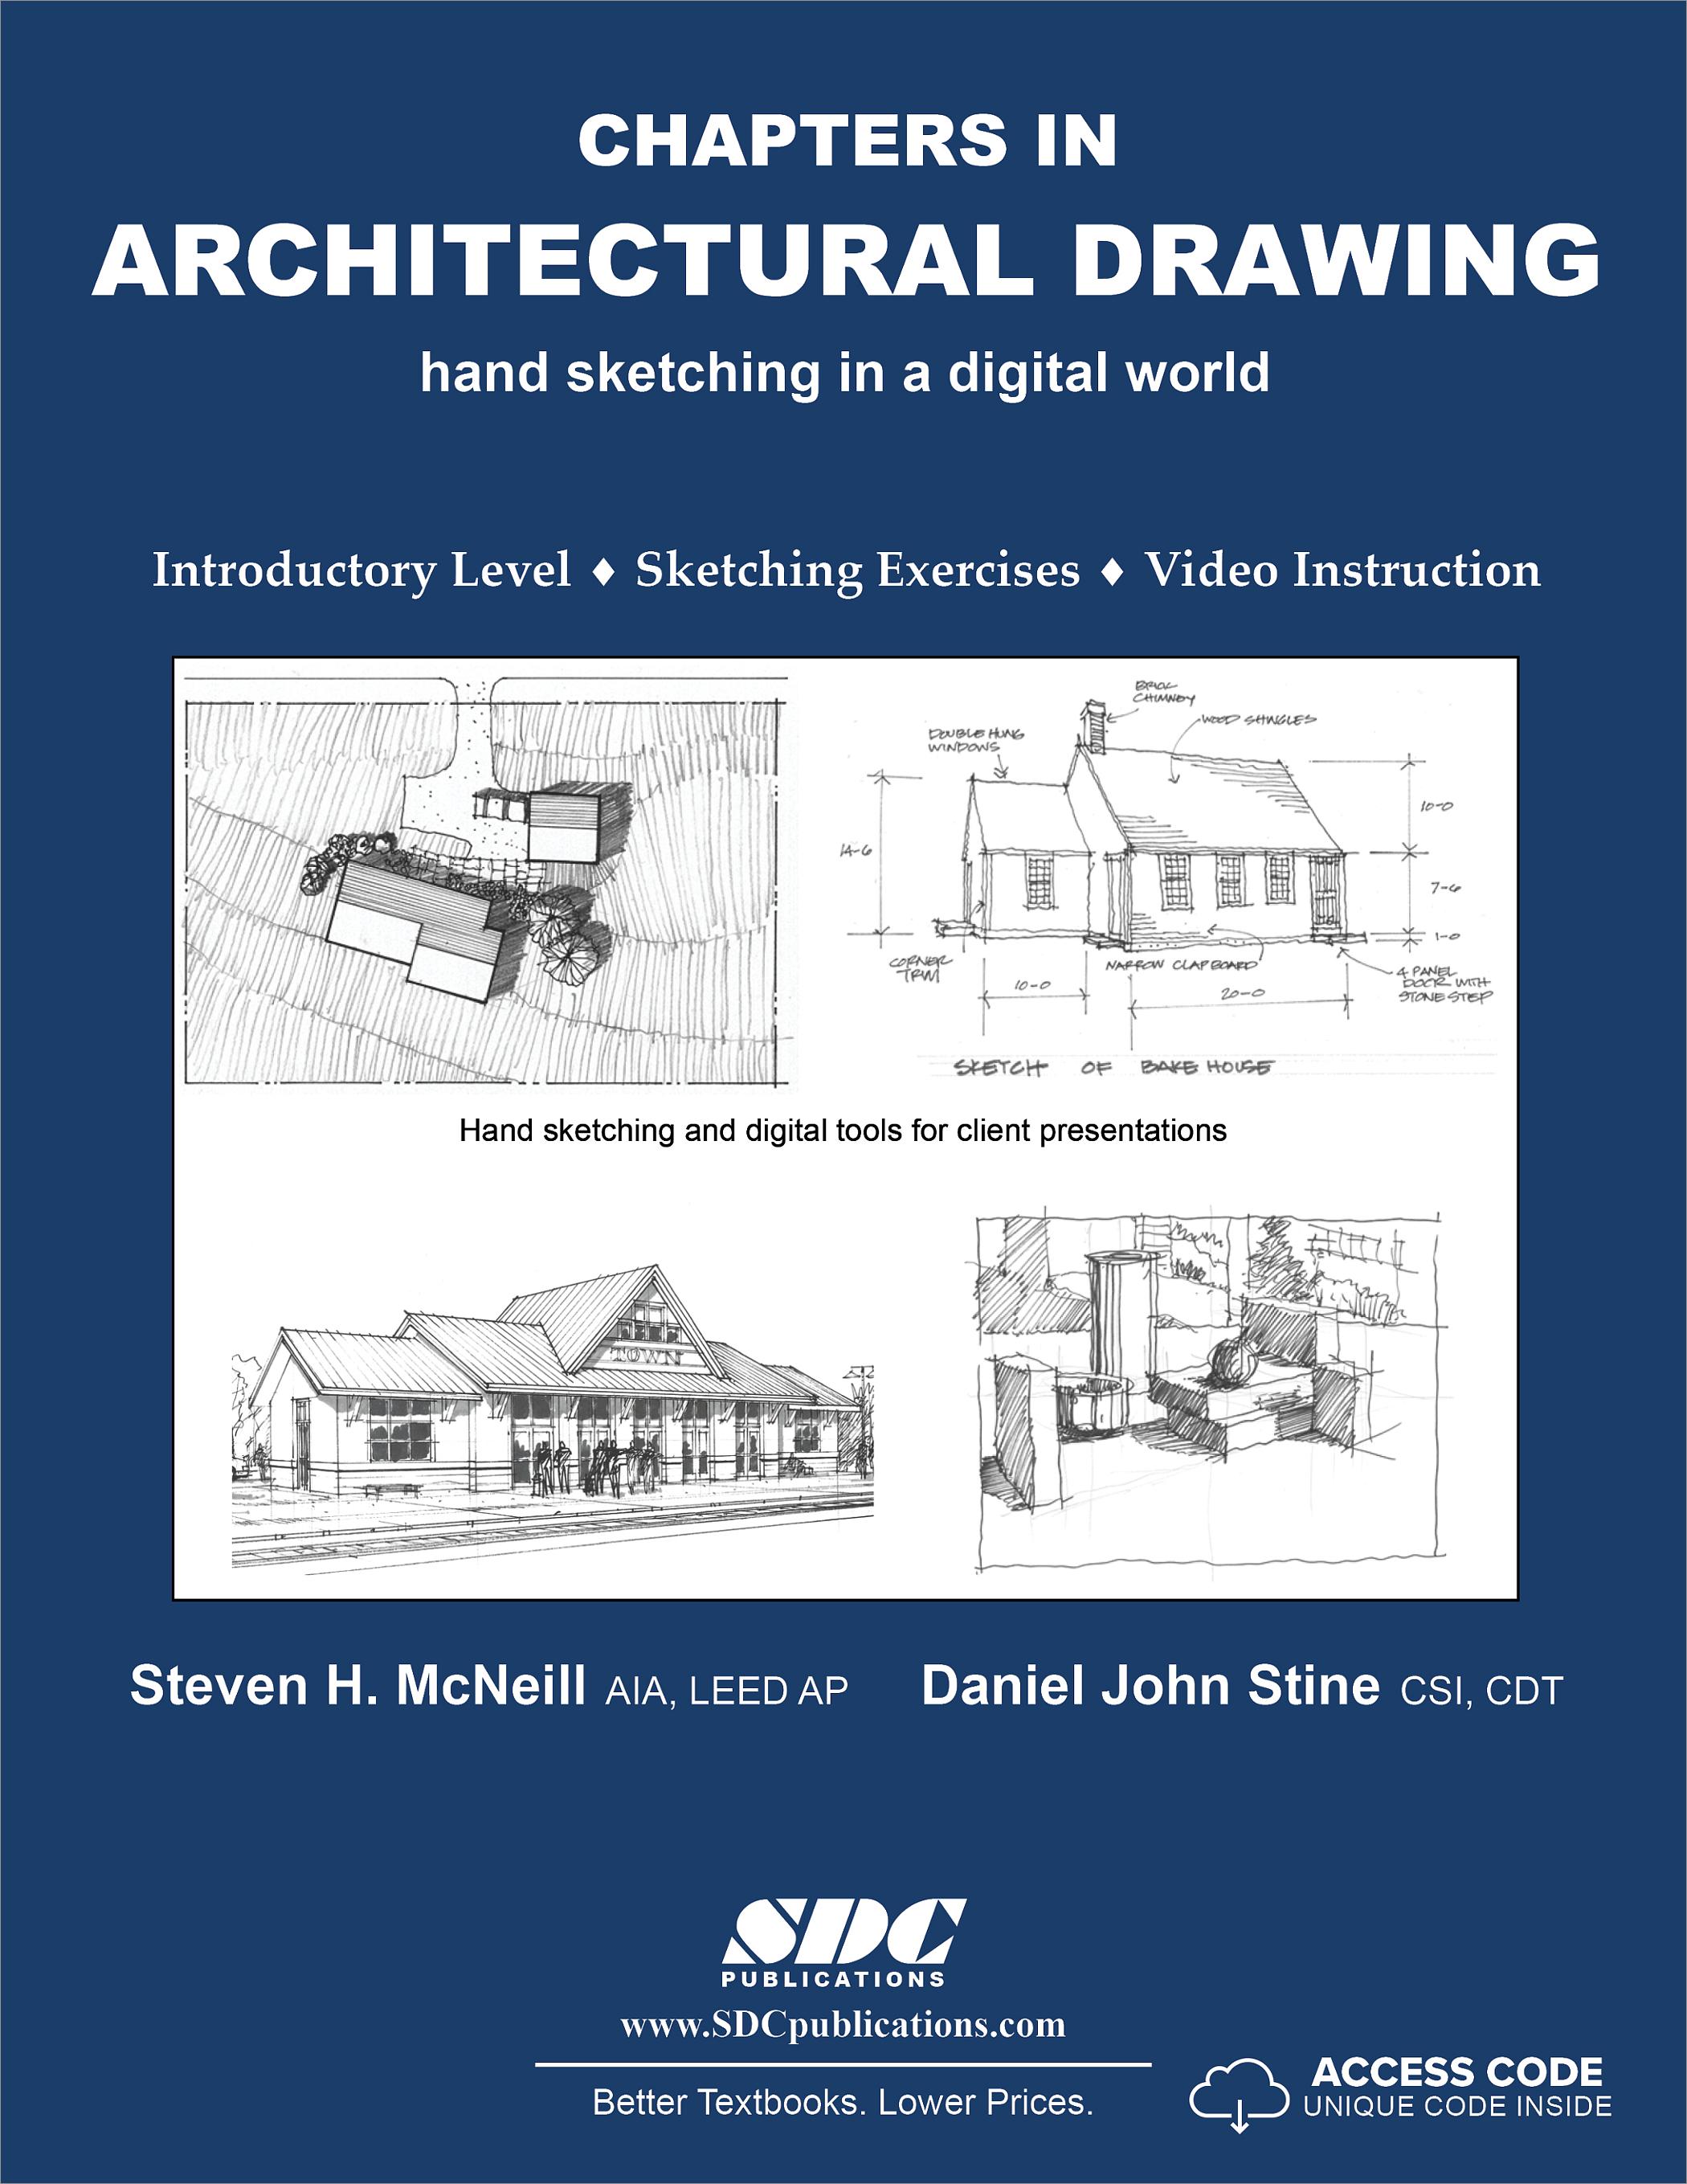 Share more than 75 architectural sketching techniques super hot - in ...